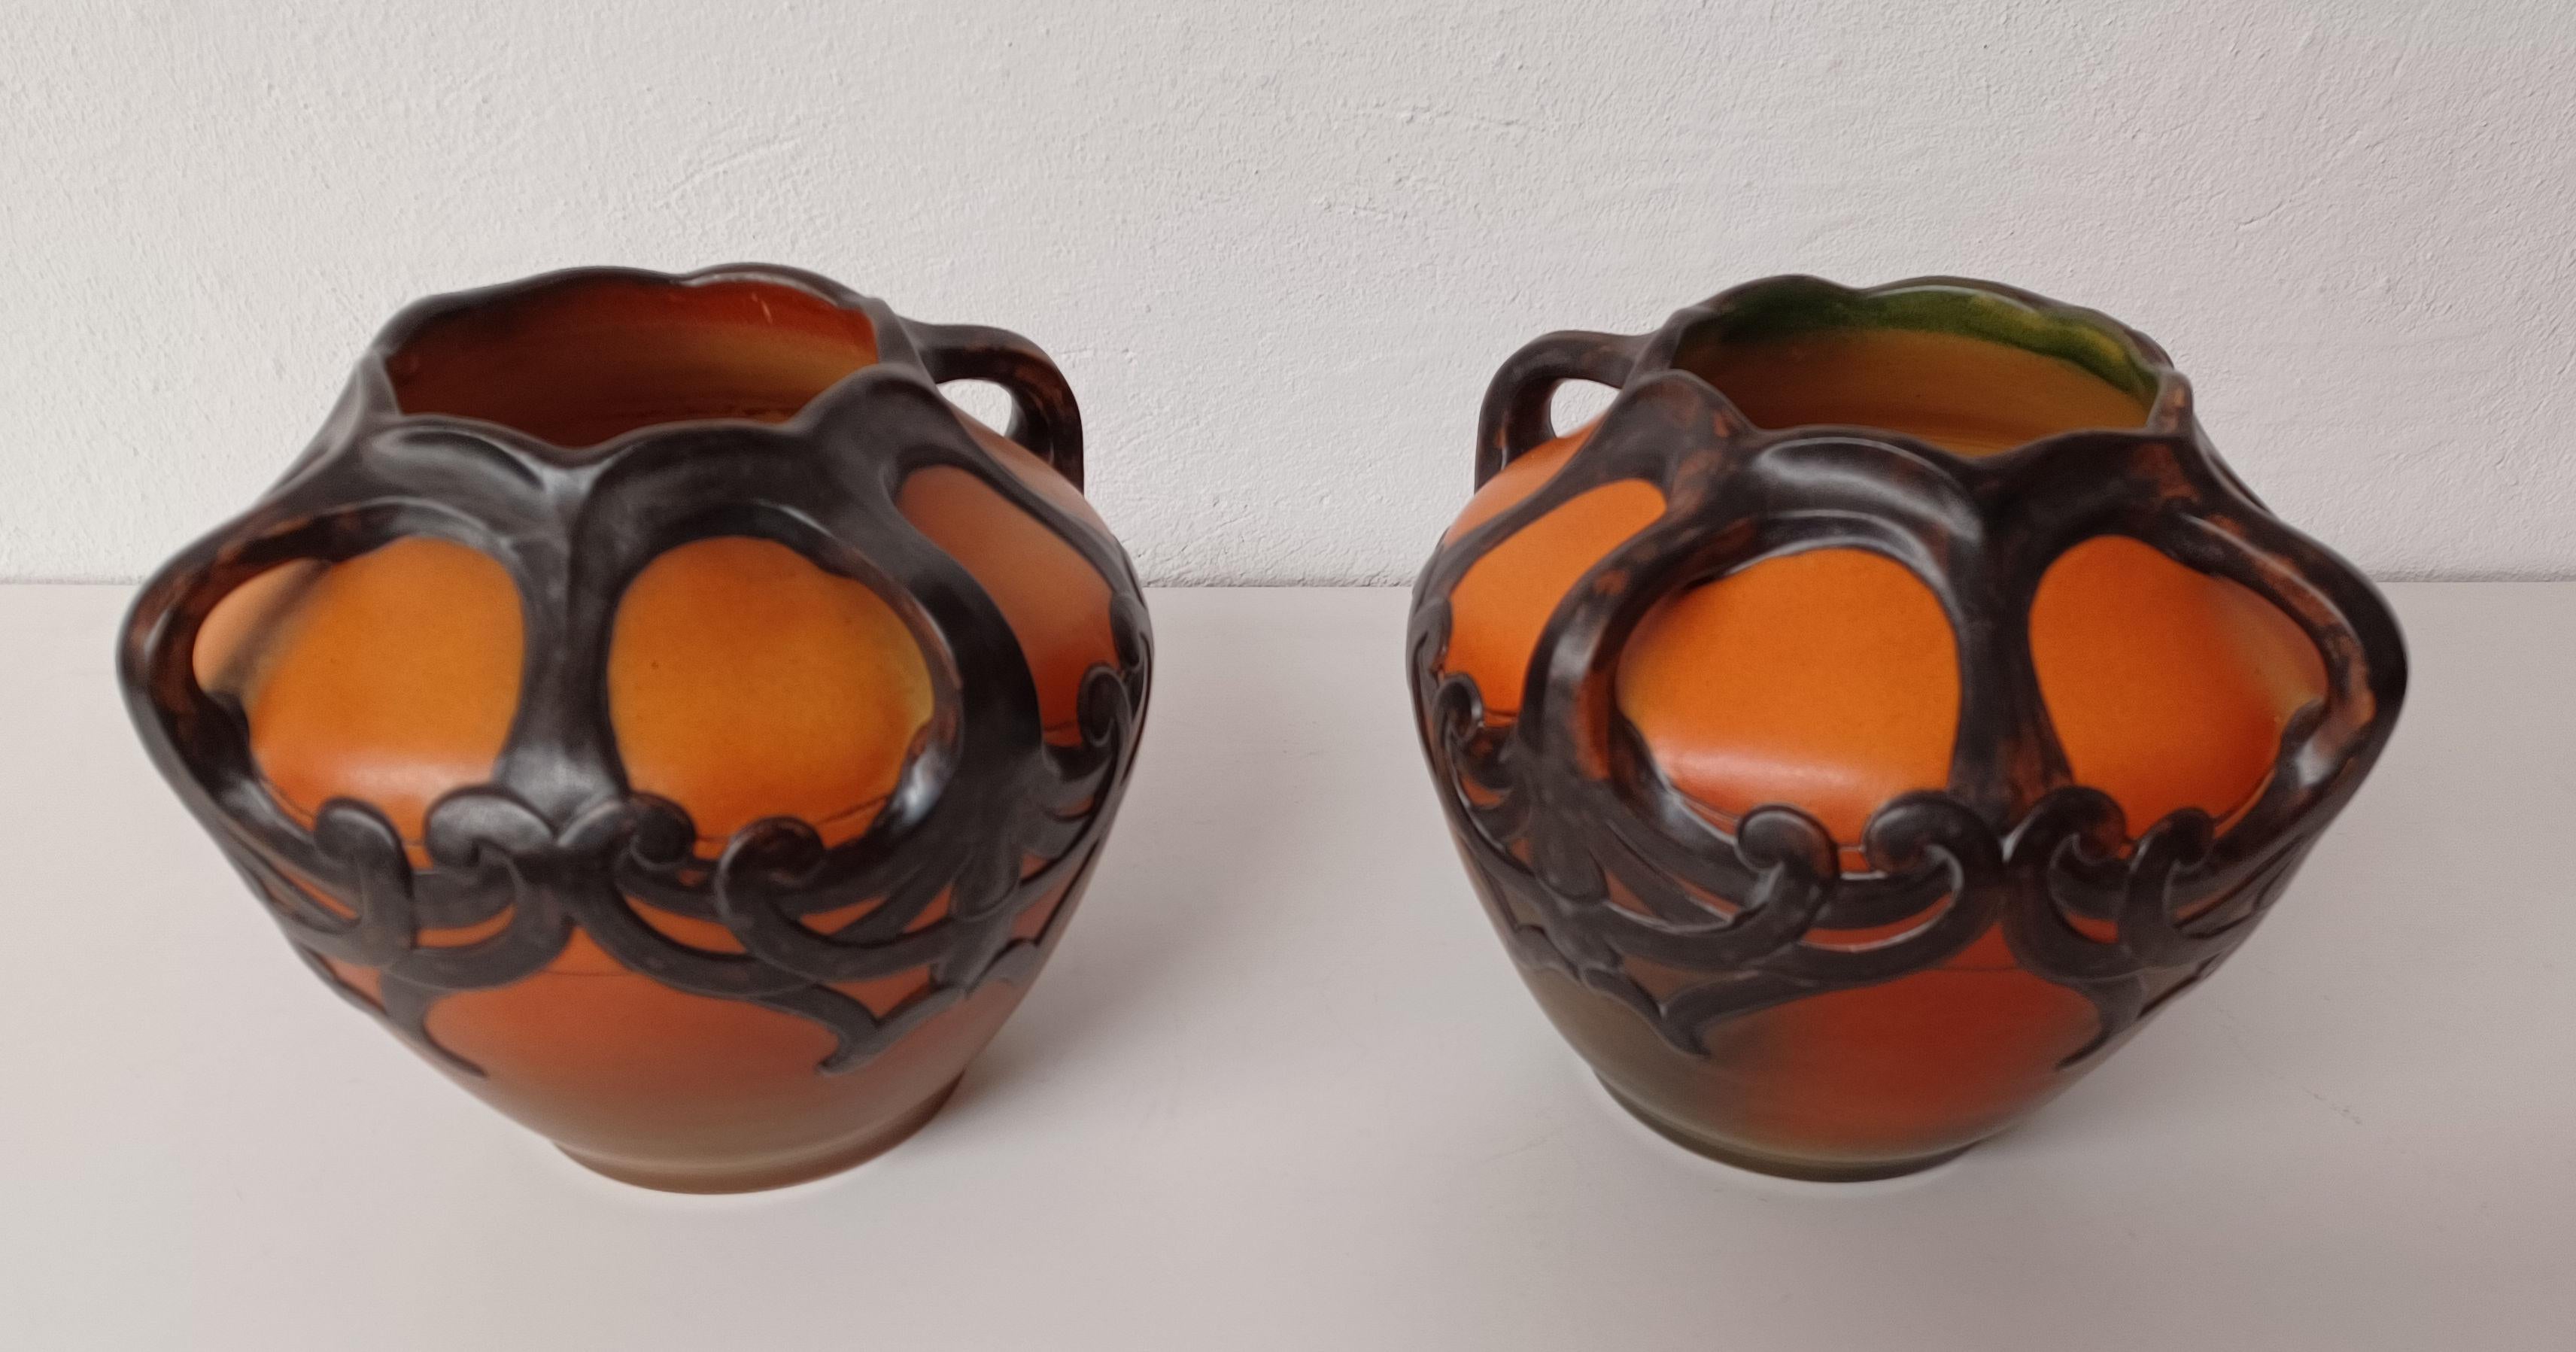 Early 20th Century 1900s Two Karen Hagen Hand-Crafted Danish Art Nouveau Vases by P. Ipsens Enke For Sale